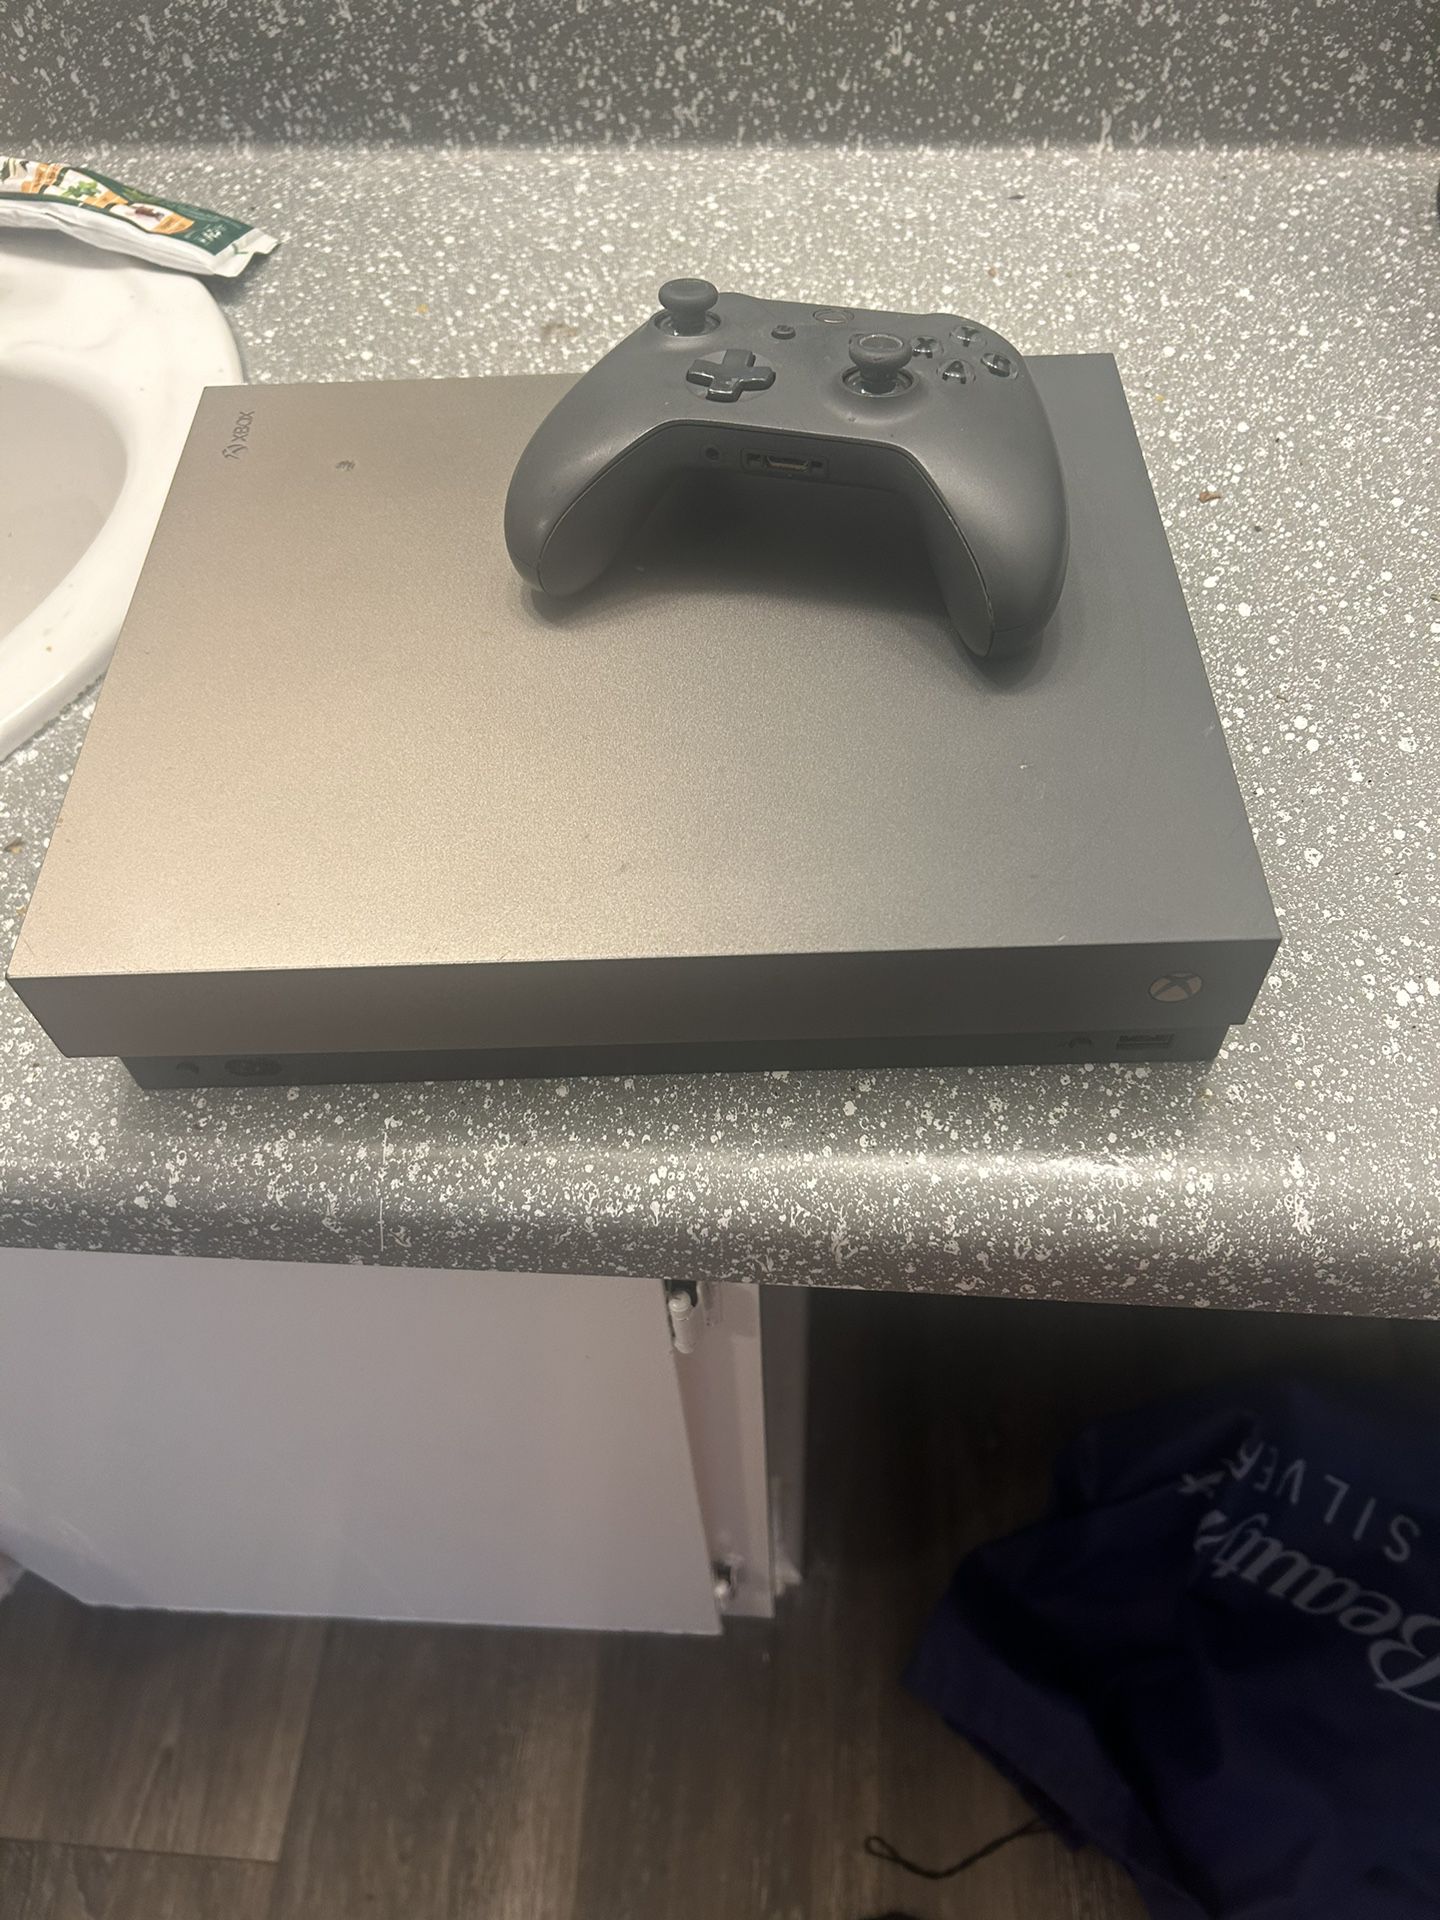 (Best Offer) Xbox One S Grey /gold 